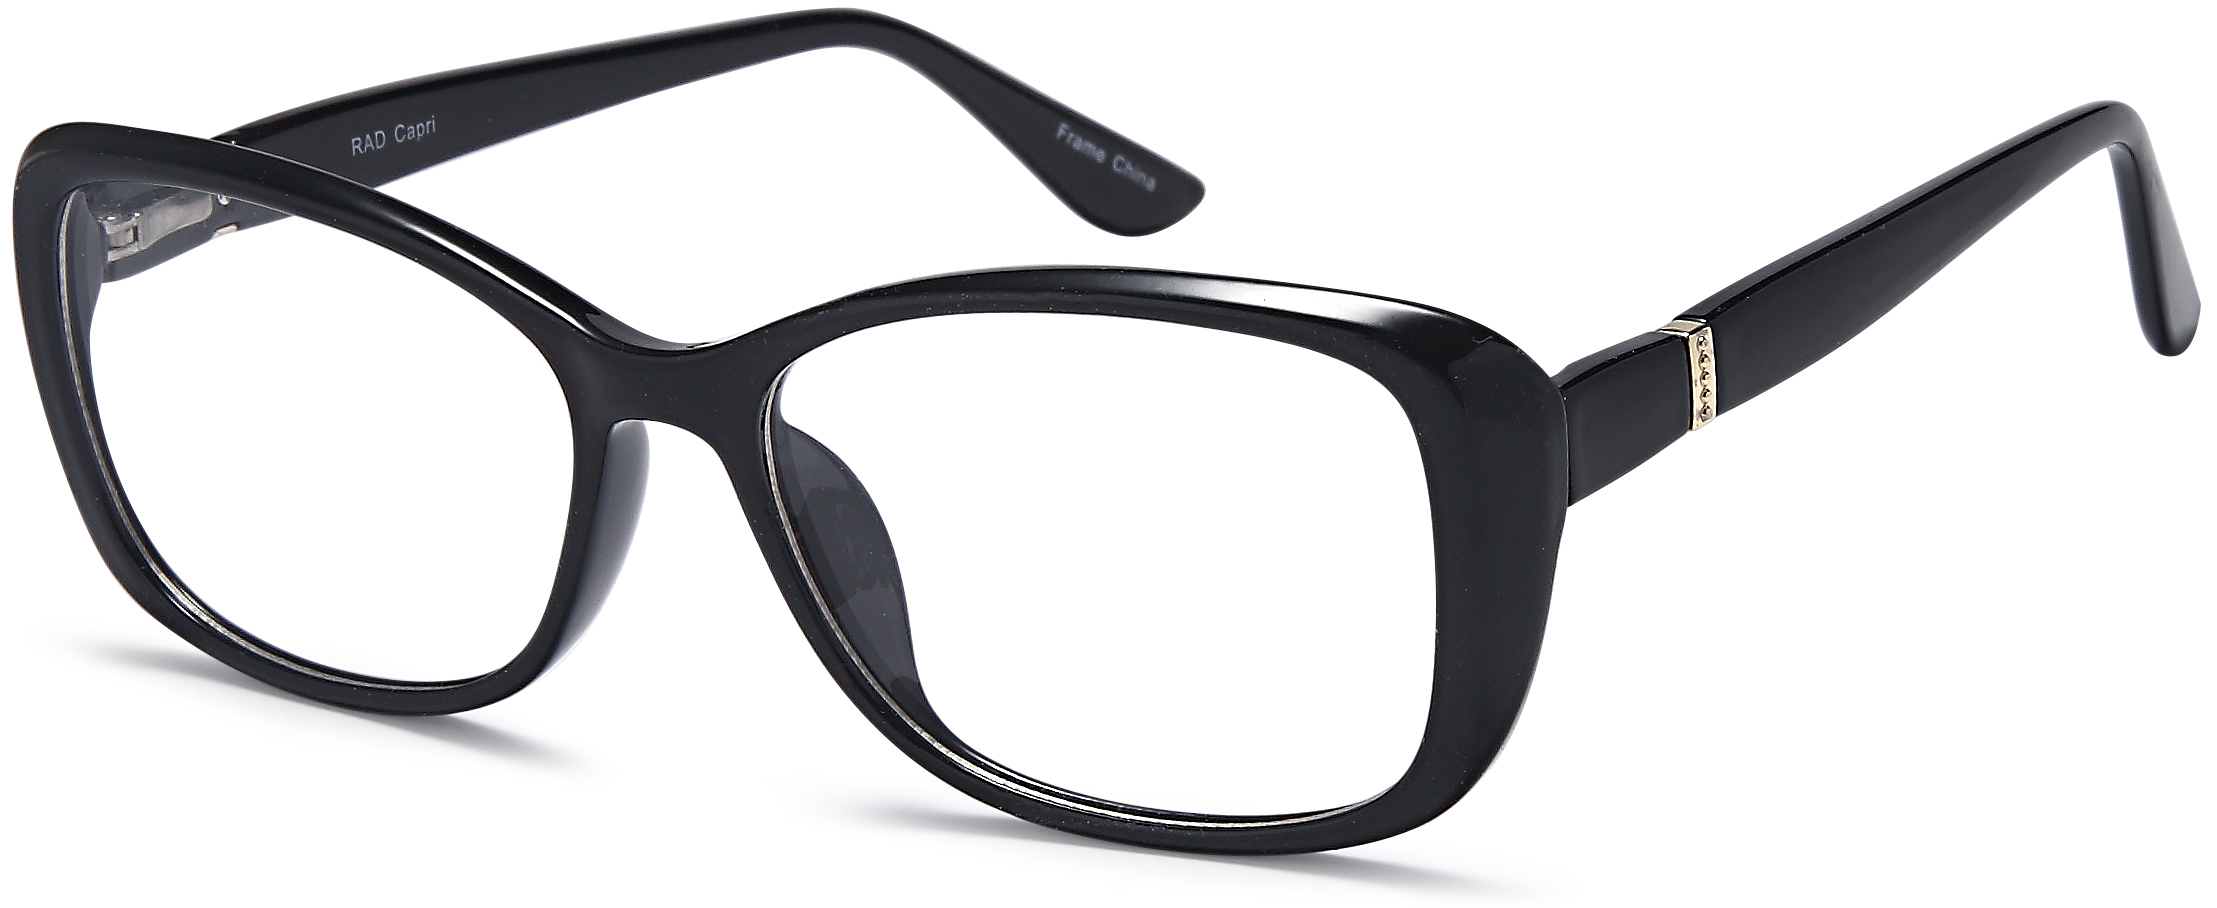 Picture of Millennial Eyeglasses RAD